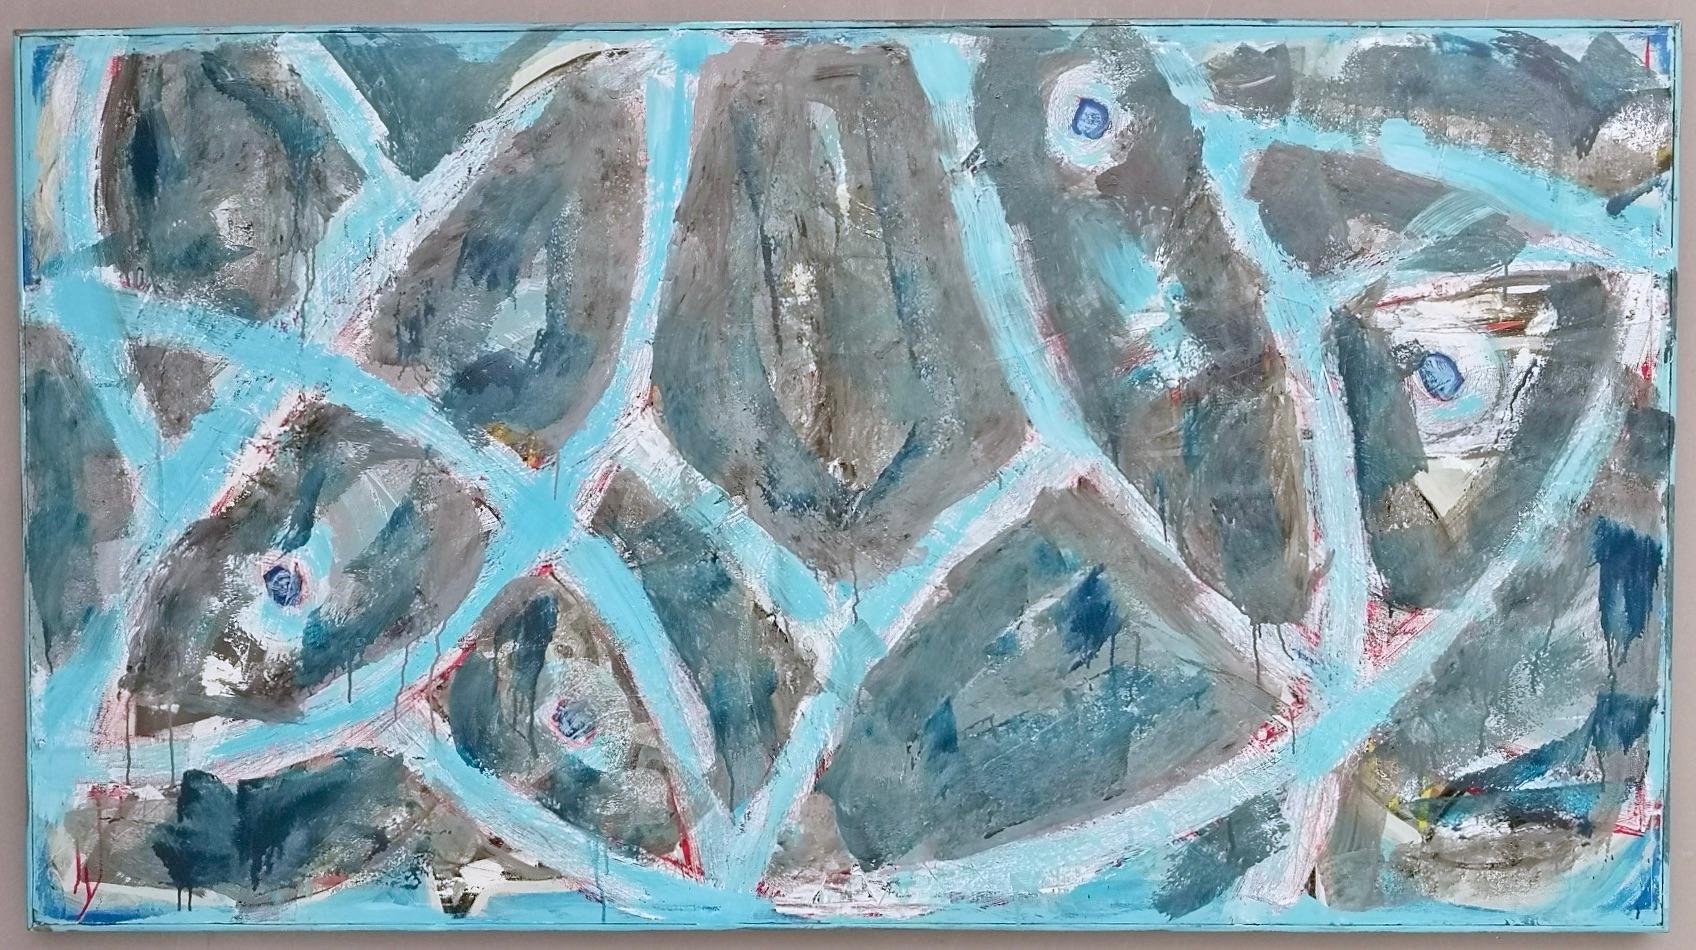 Translated title: "Fishes"

Acrylic paint and collage on canvas. 